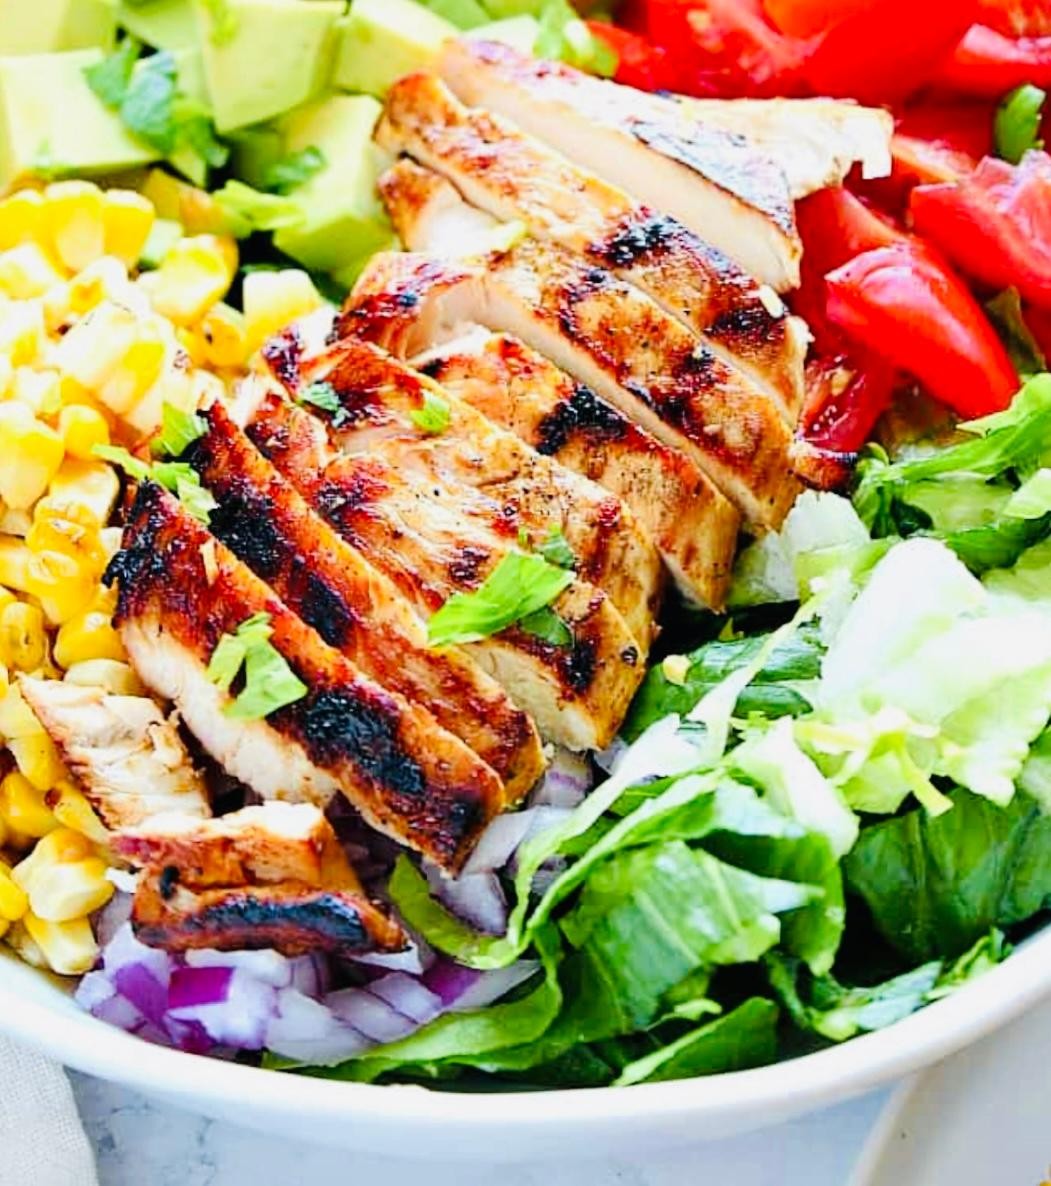 GRILLED CHICKEN SALAD (MEAL) - PRICE PER PERSON